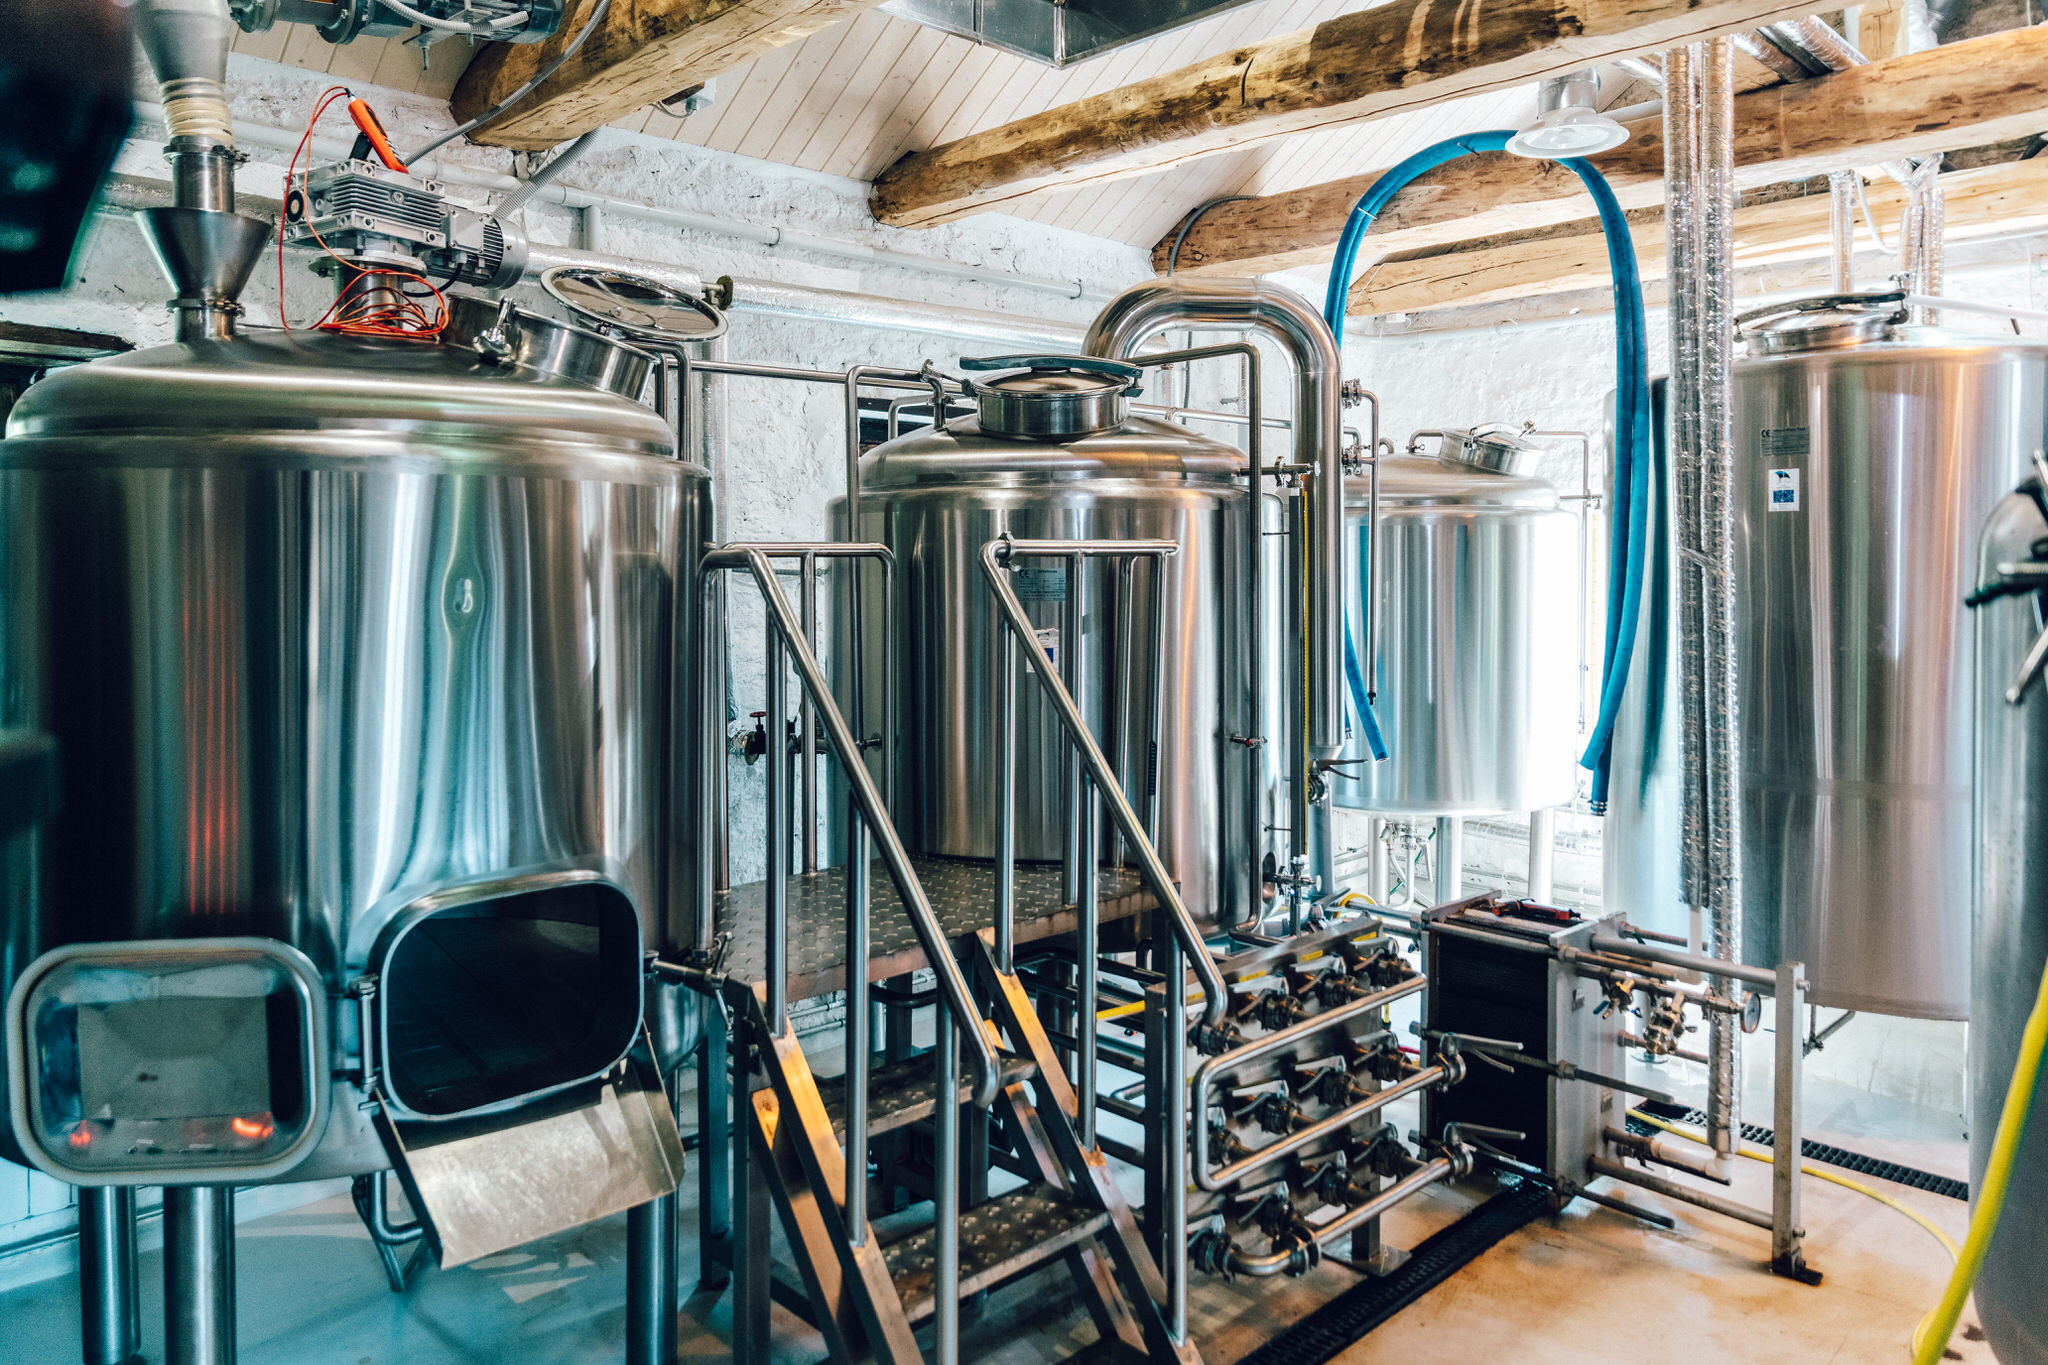 1000L Brewery Equipment for Purtse Brewery In Estonia